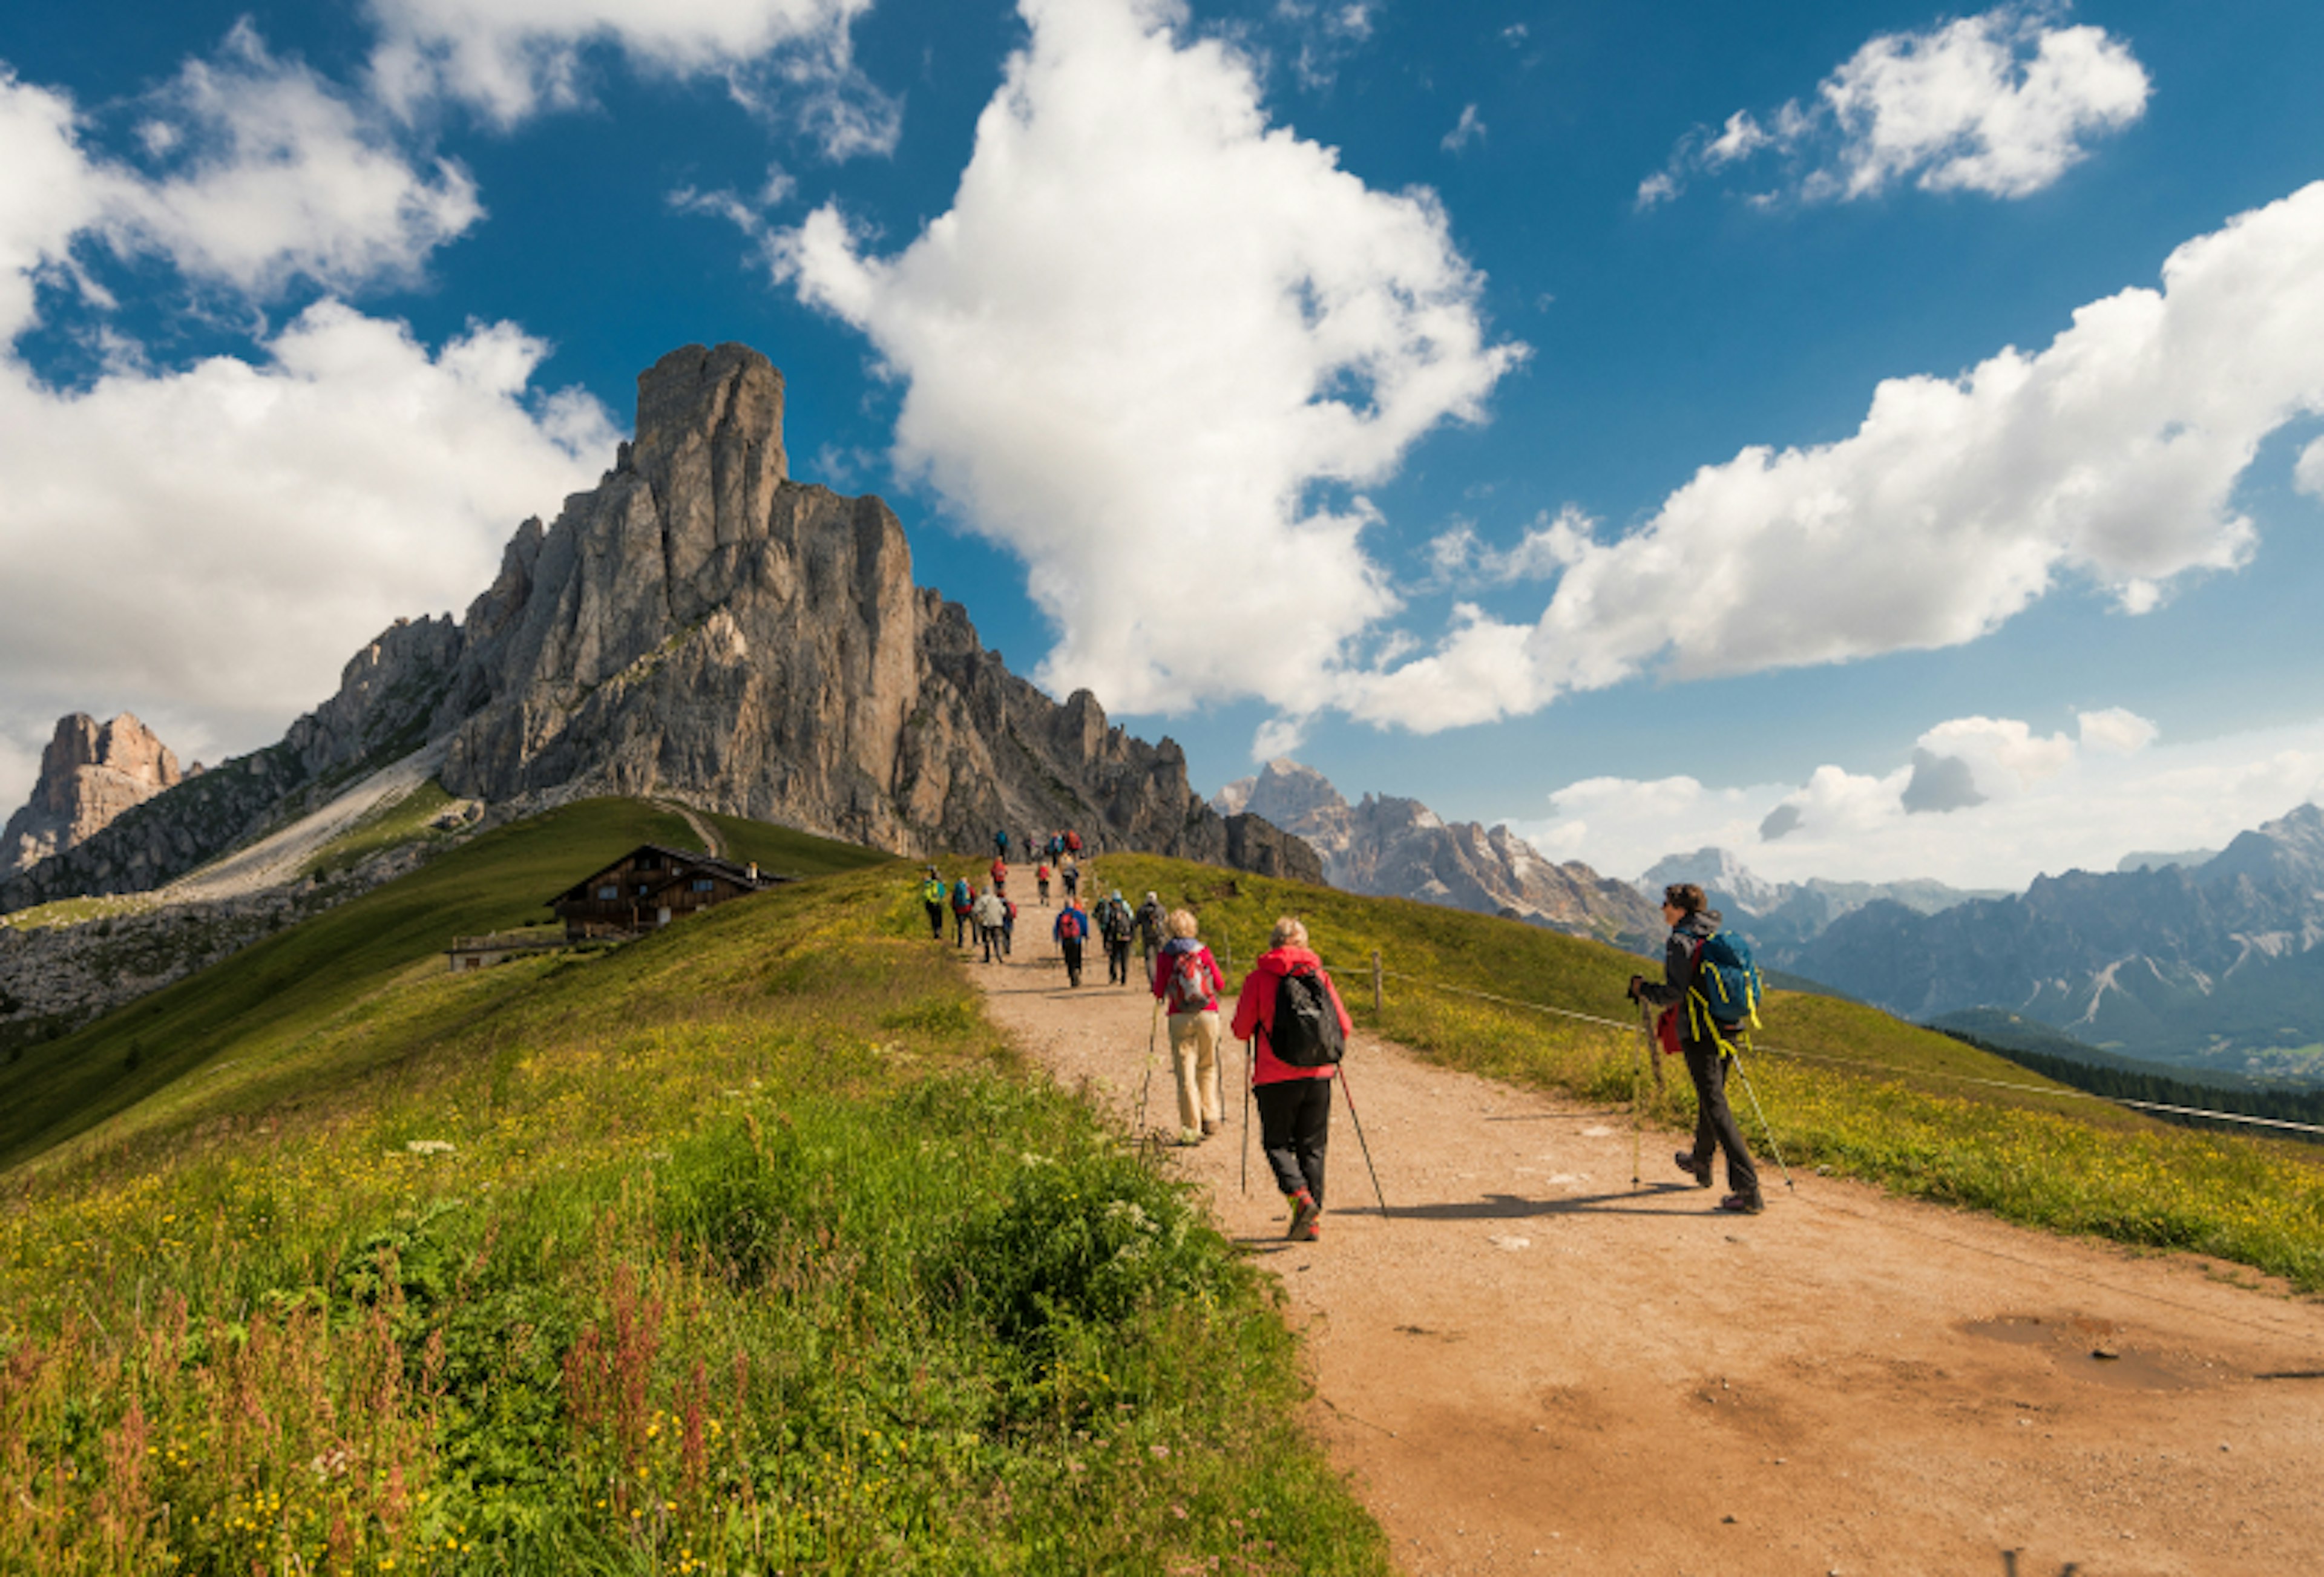 beautiful view of the Dolomites with hikers on path and grass in the foreground and hut, mountains and blue sky with clouds in the background taken on a sunny summer day